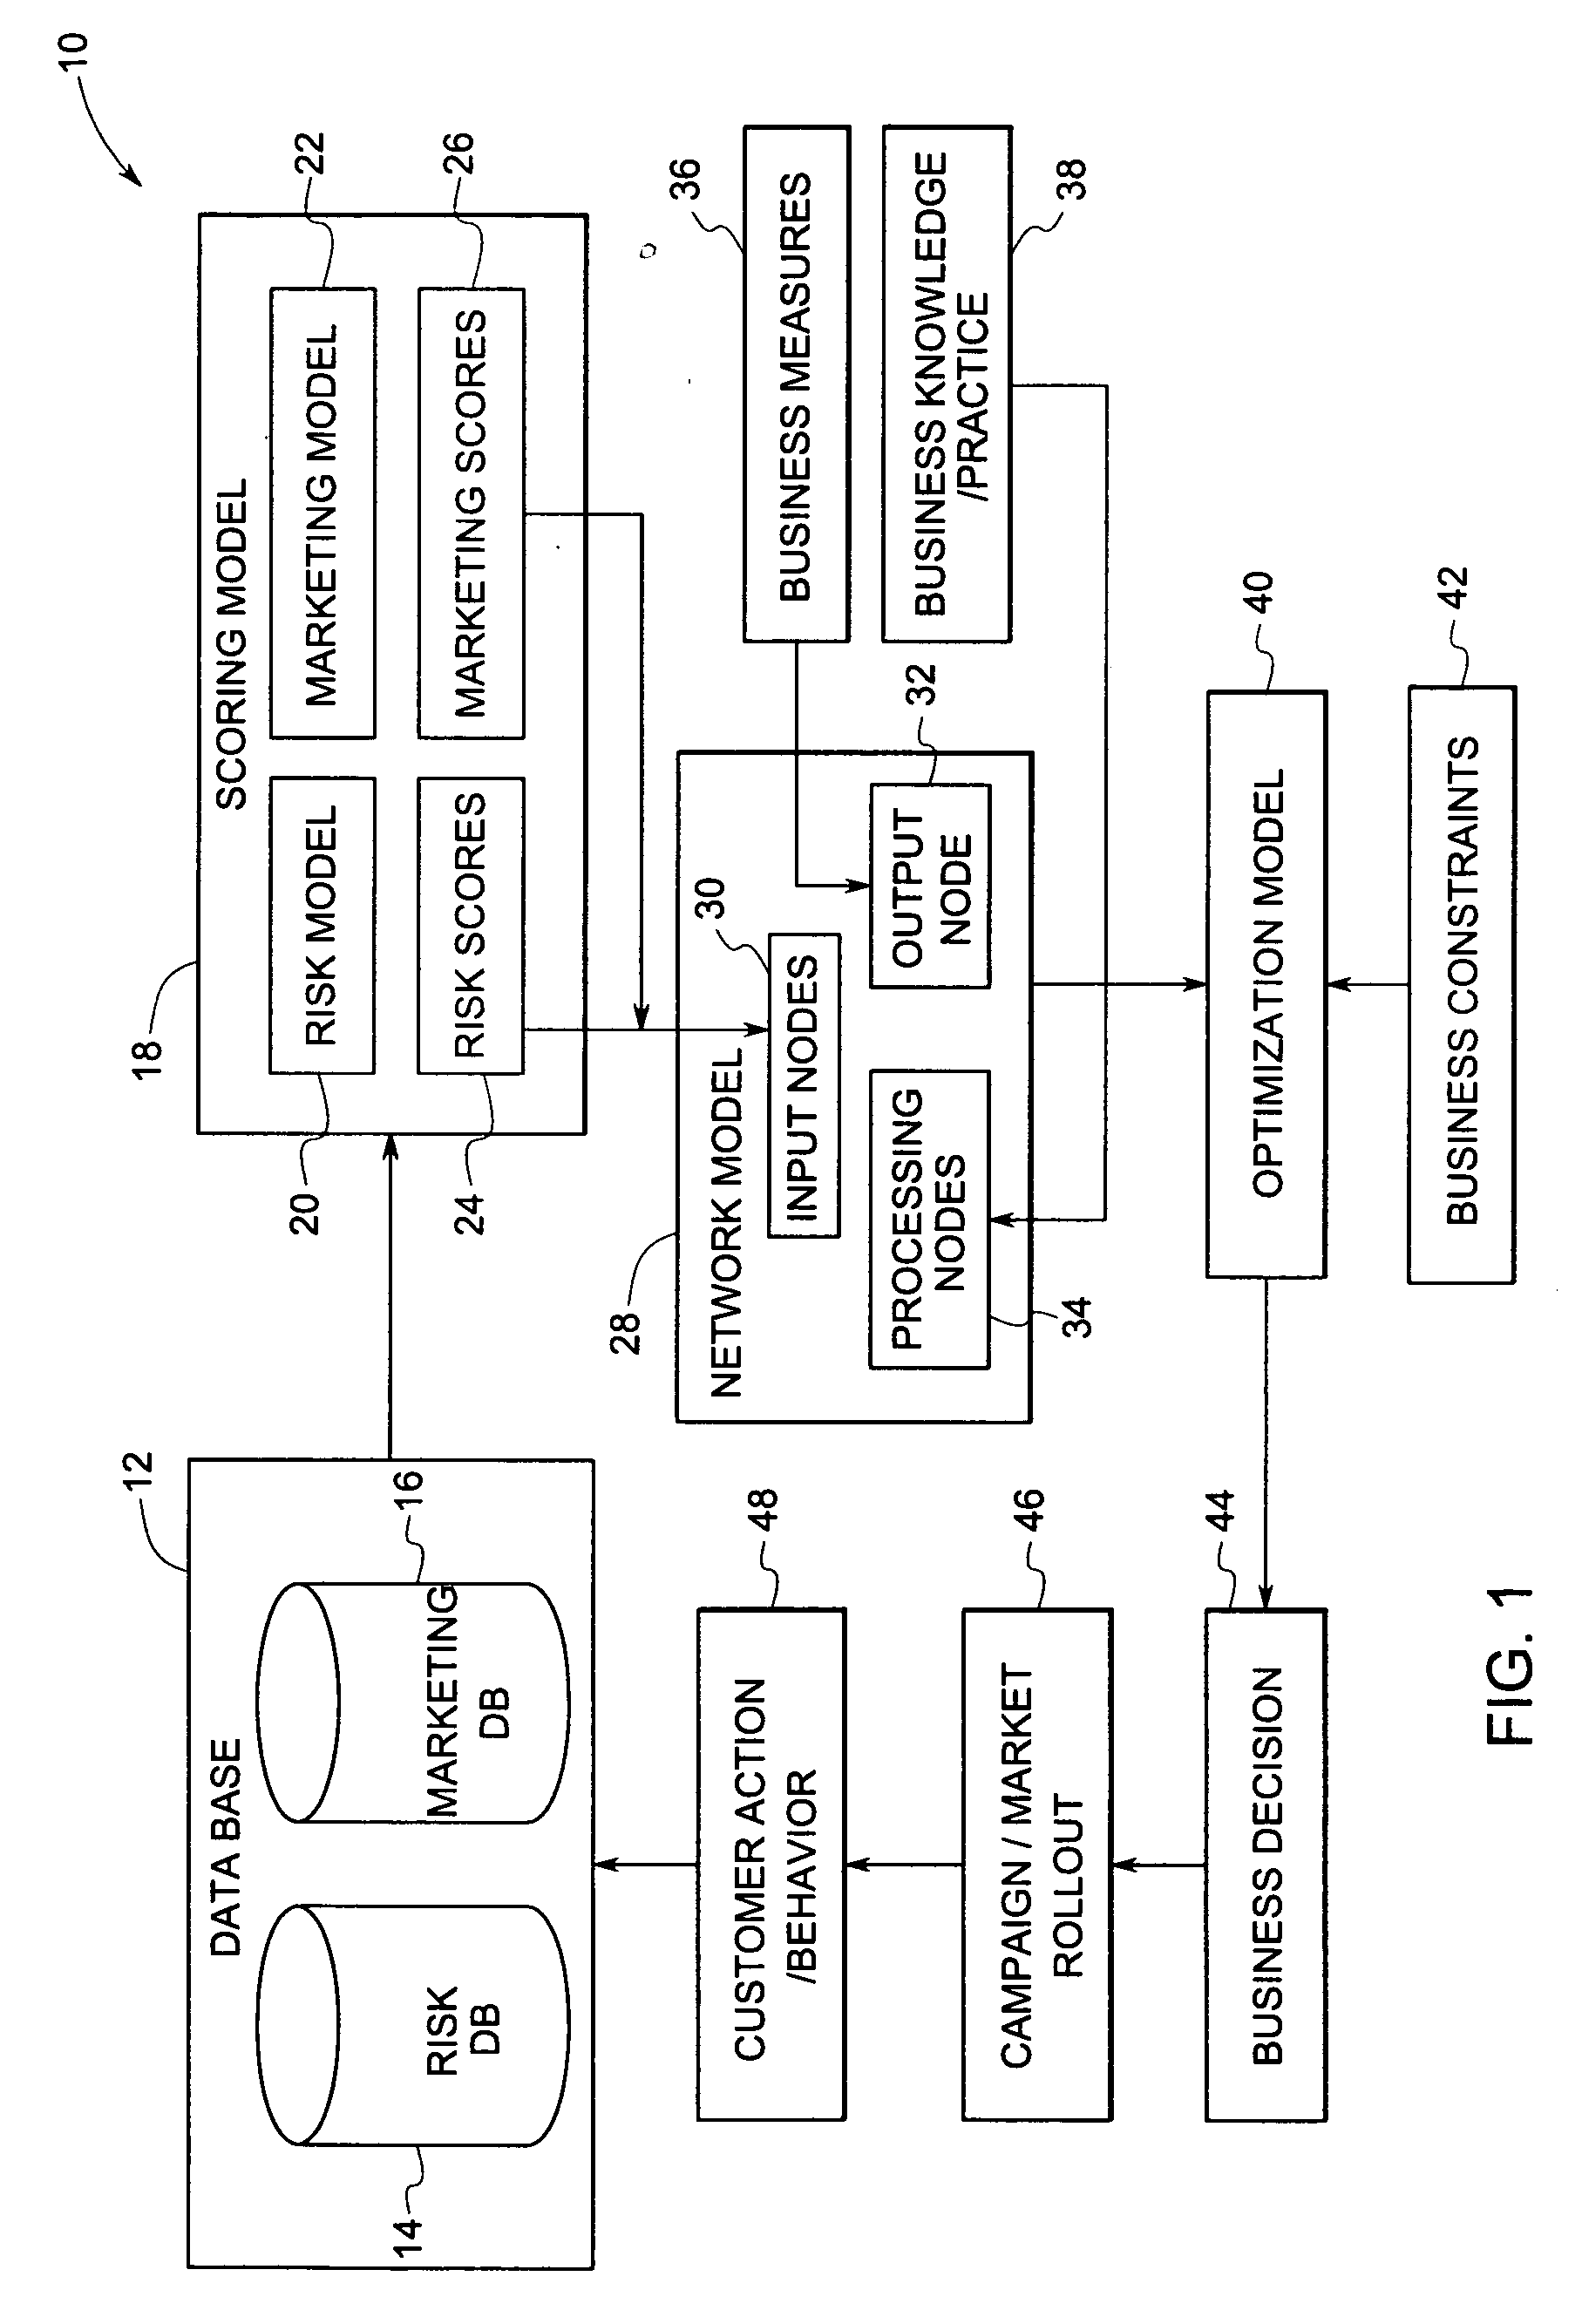 System and method for integrating risk and marketing objectives for making credit offers